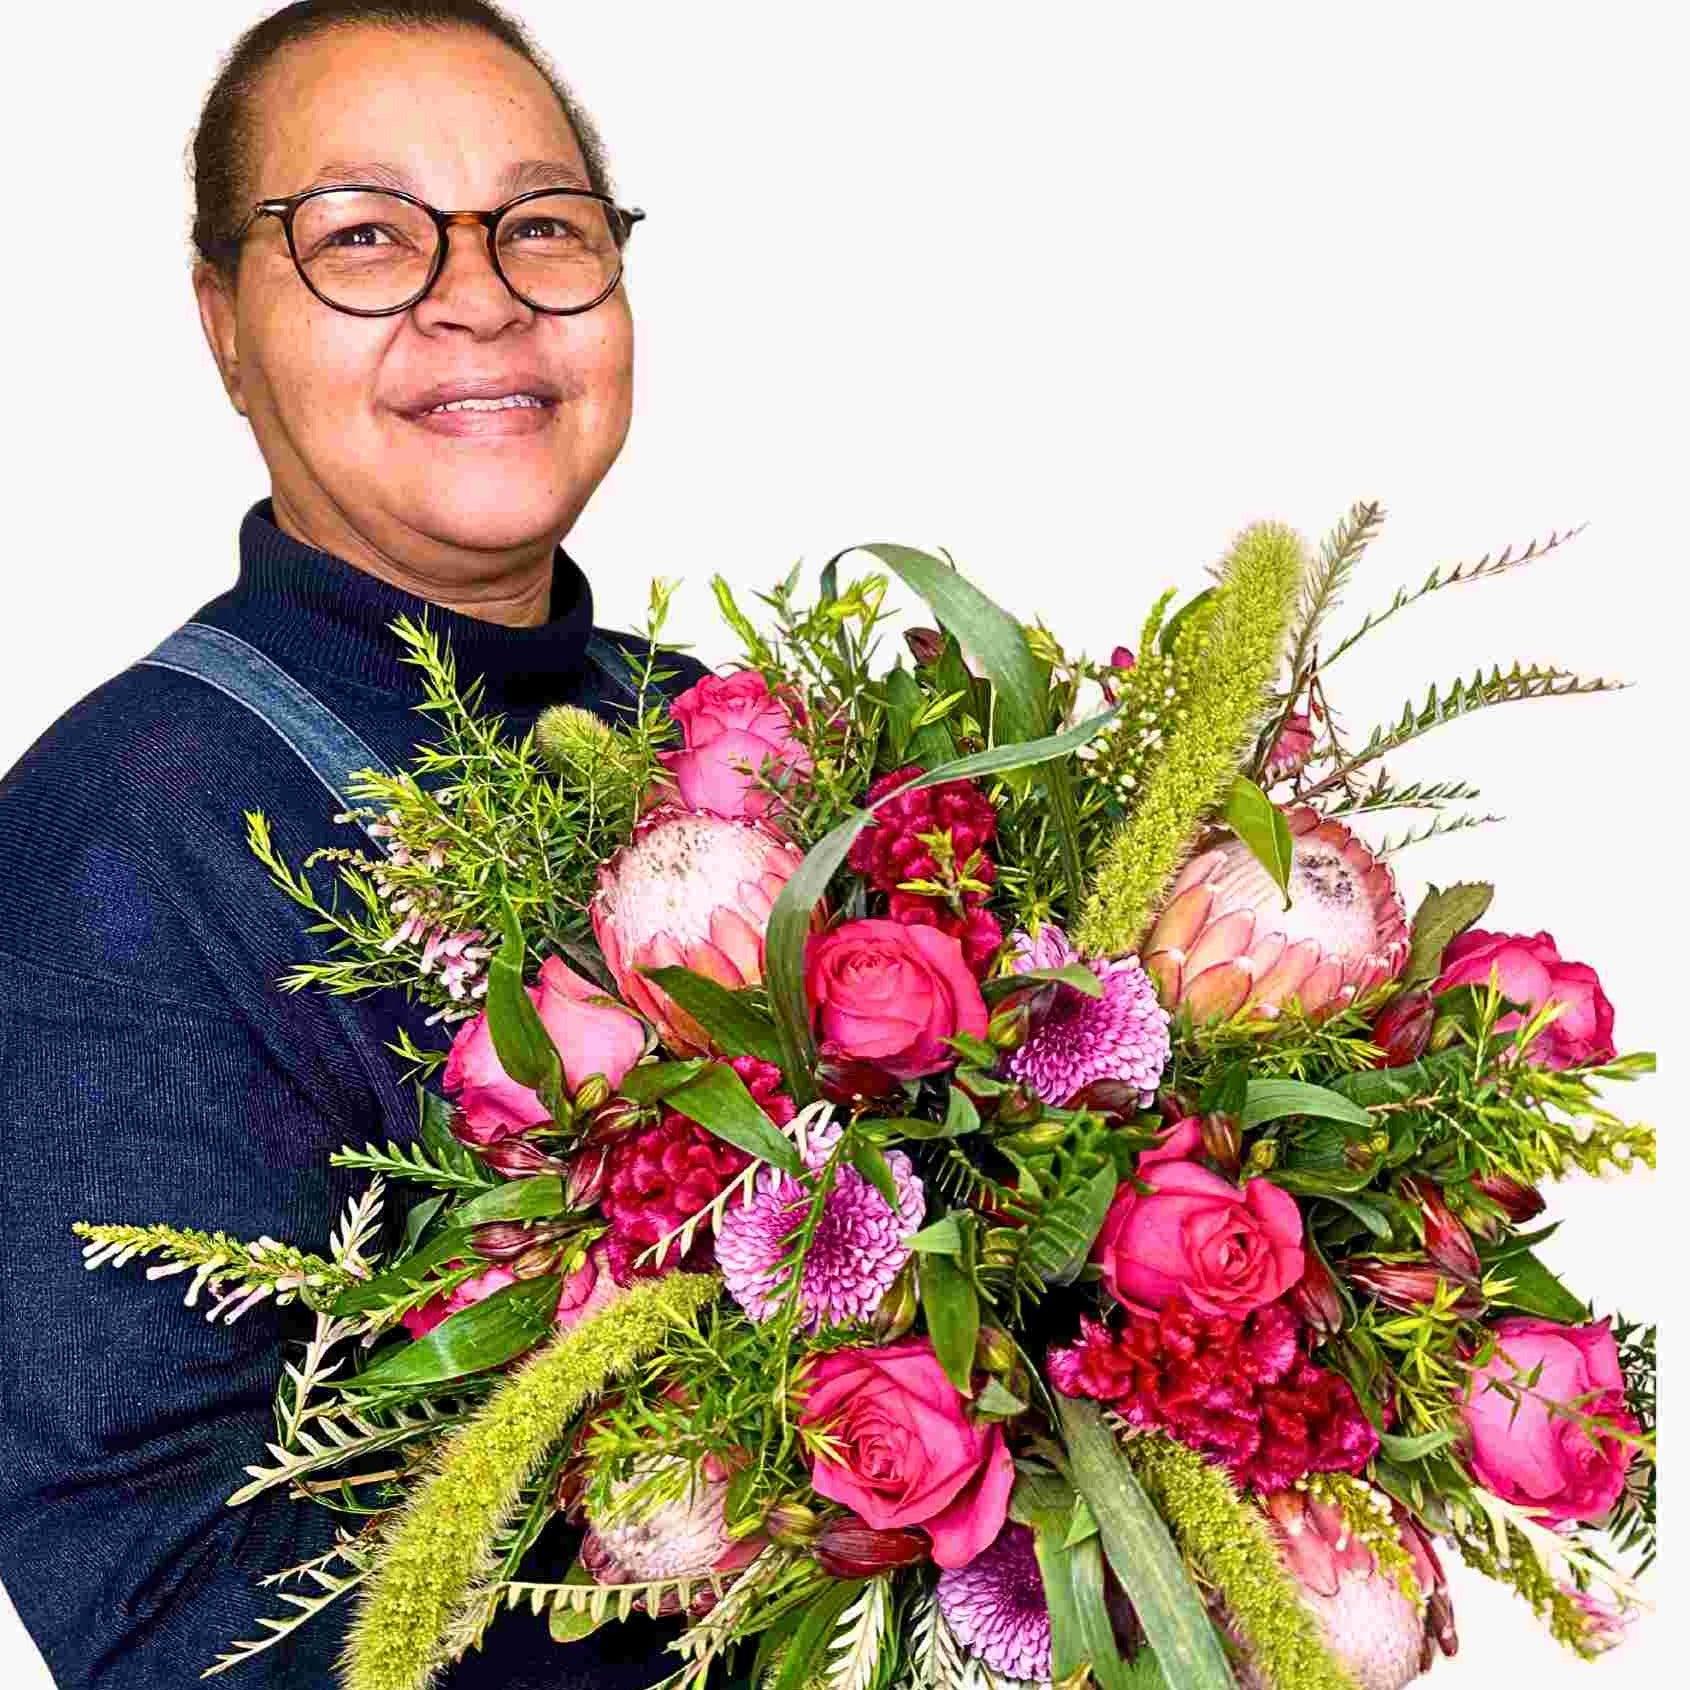 Lily, our happy florist presents her Lily's Flower Bouquet, a vibrant and lush arrangement of pink flowers and greenery, showcasing the quality and beauty offered by Fabulous Flowers and Gifts.